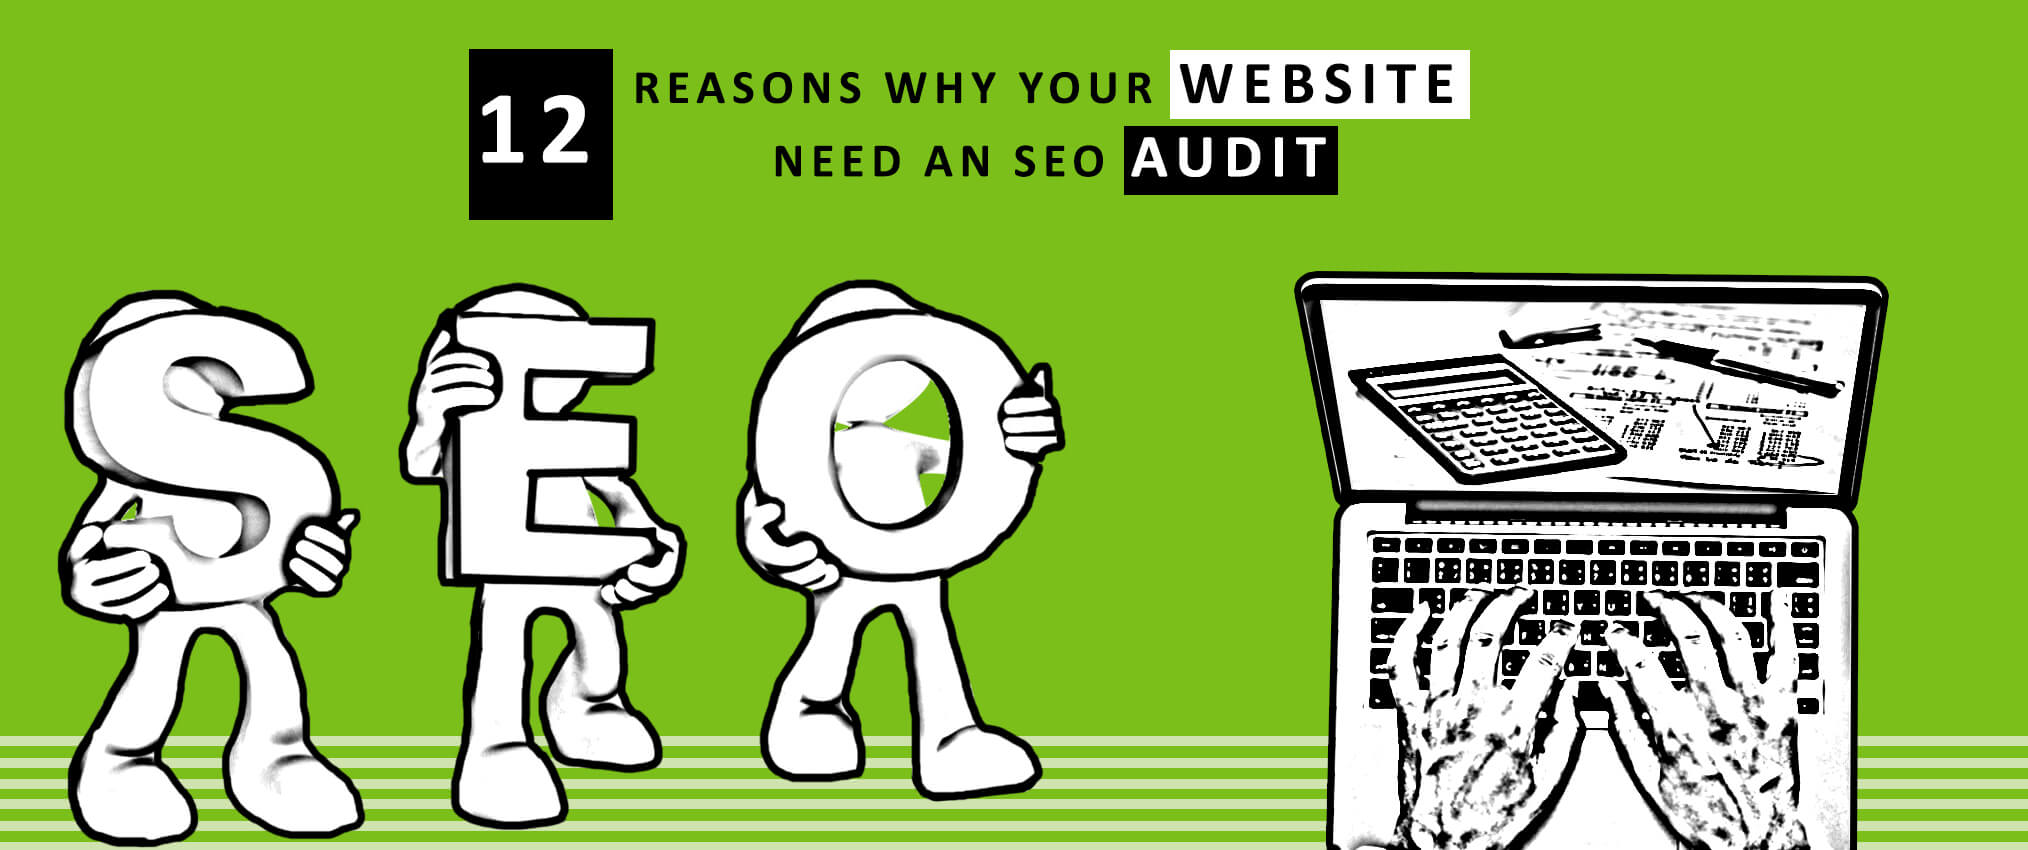 12 Reasons Why Your Website Need an SEO Audit